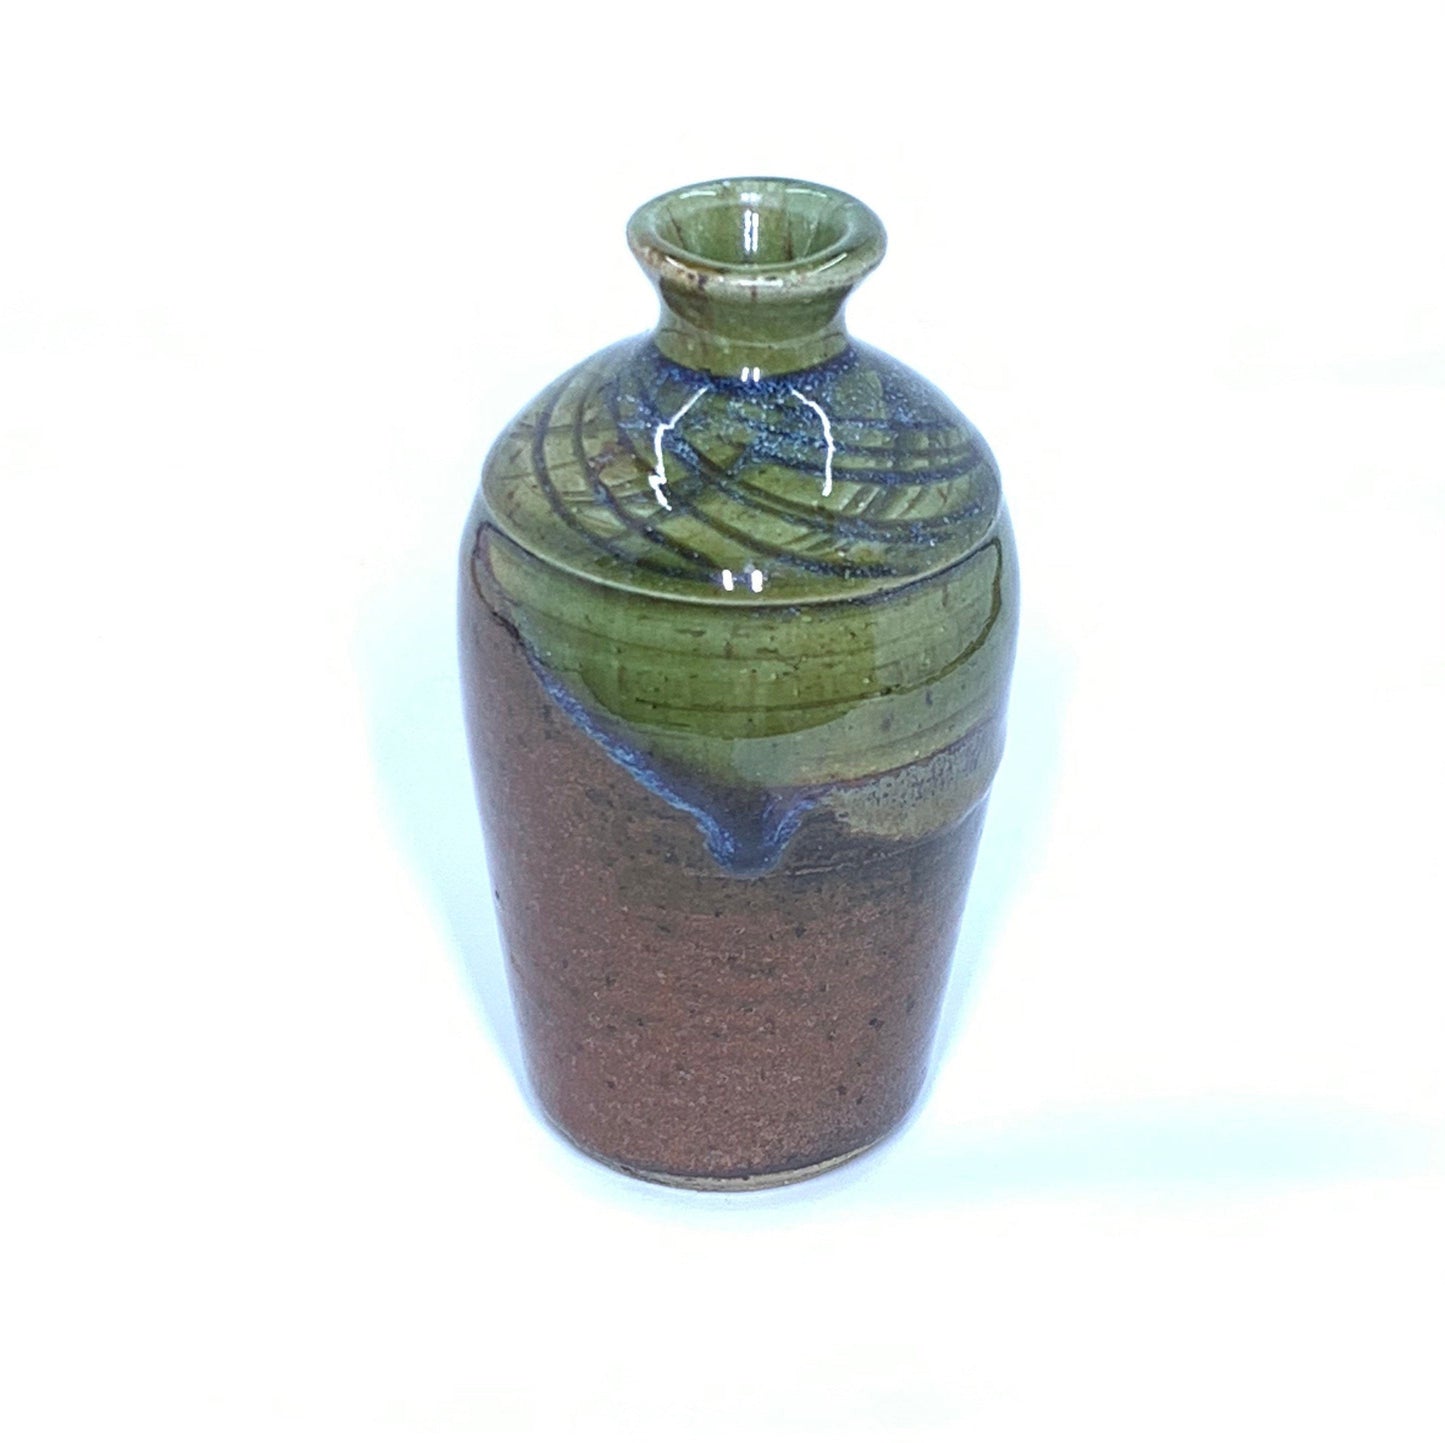 Vintage Glazed Pottery Bud Vase | Small Handmade Vase | Brown and Green Pottery